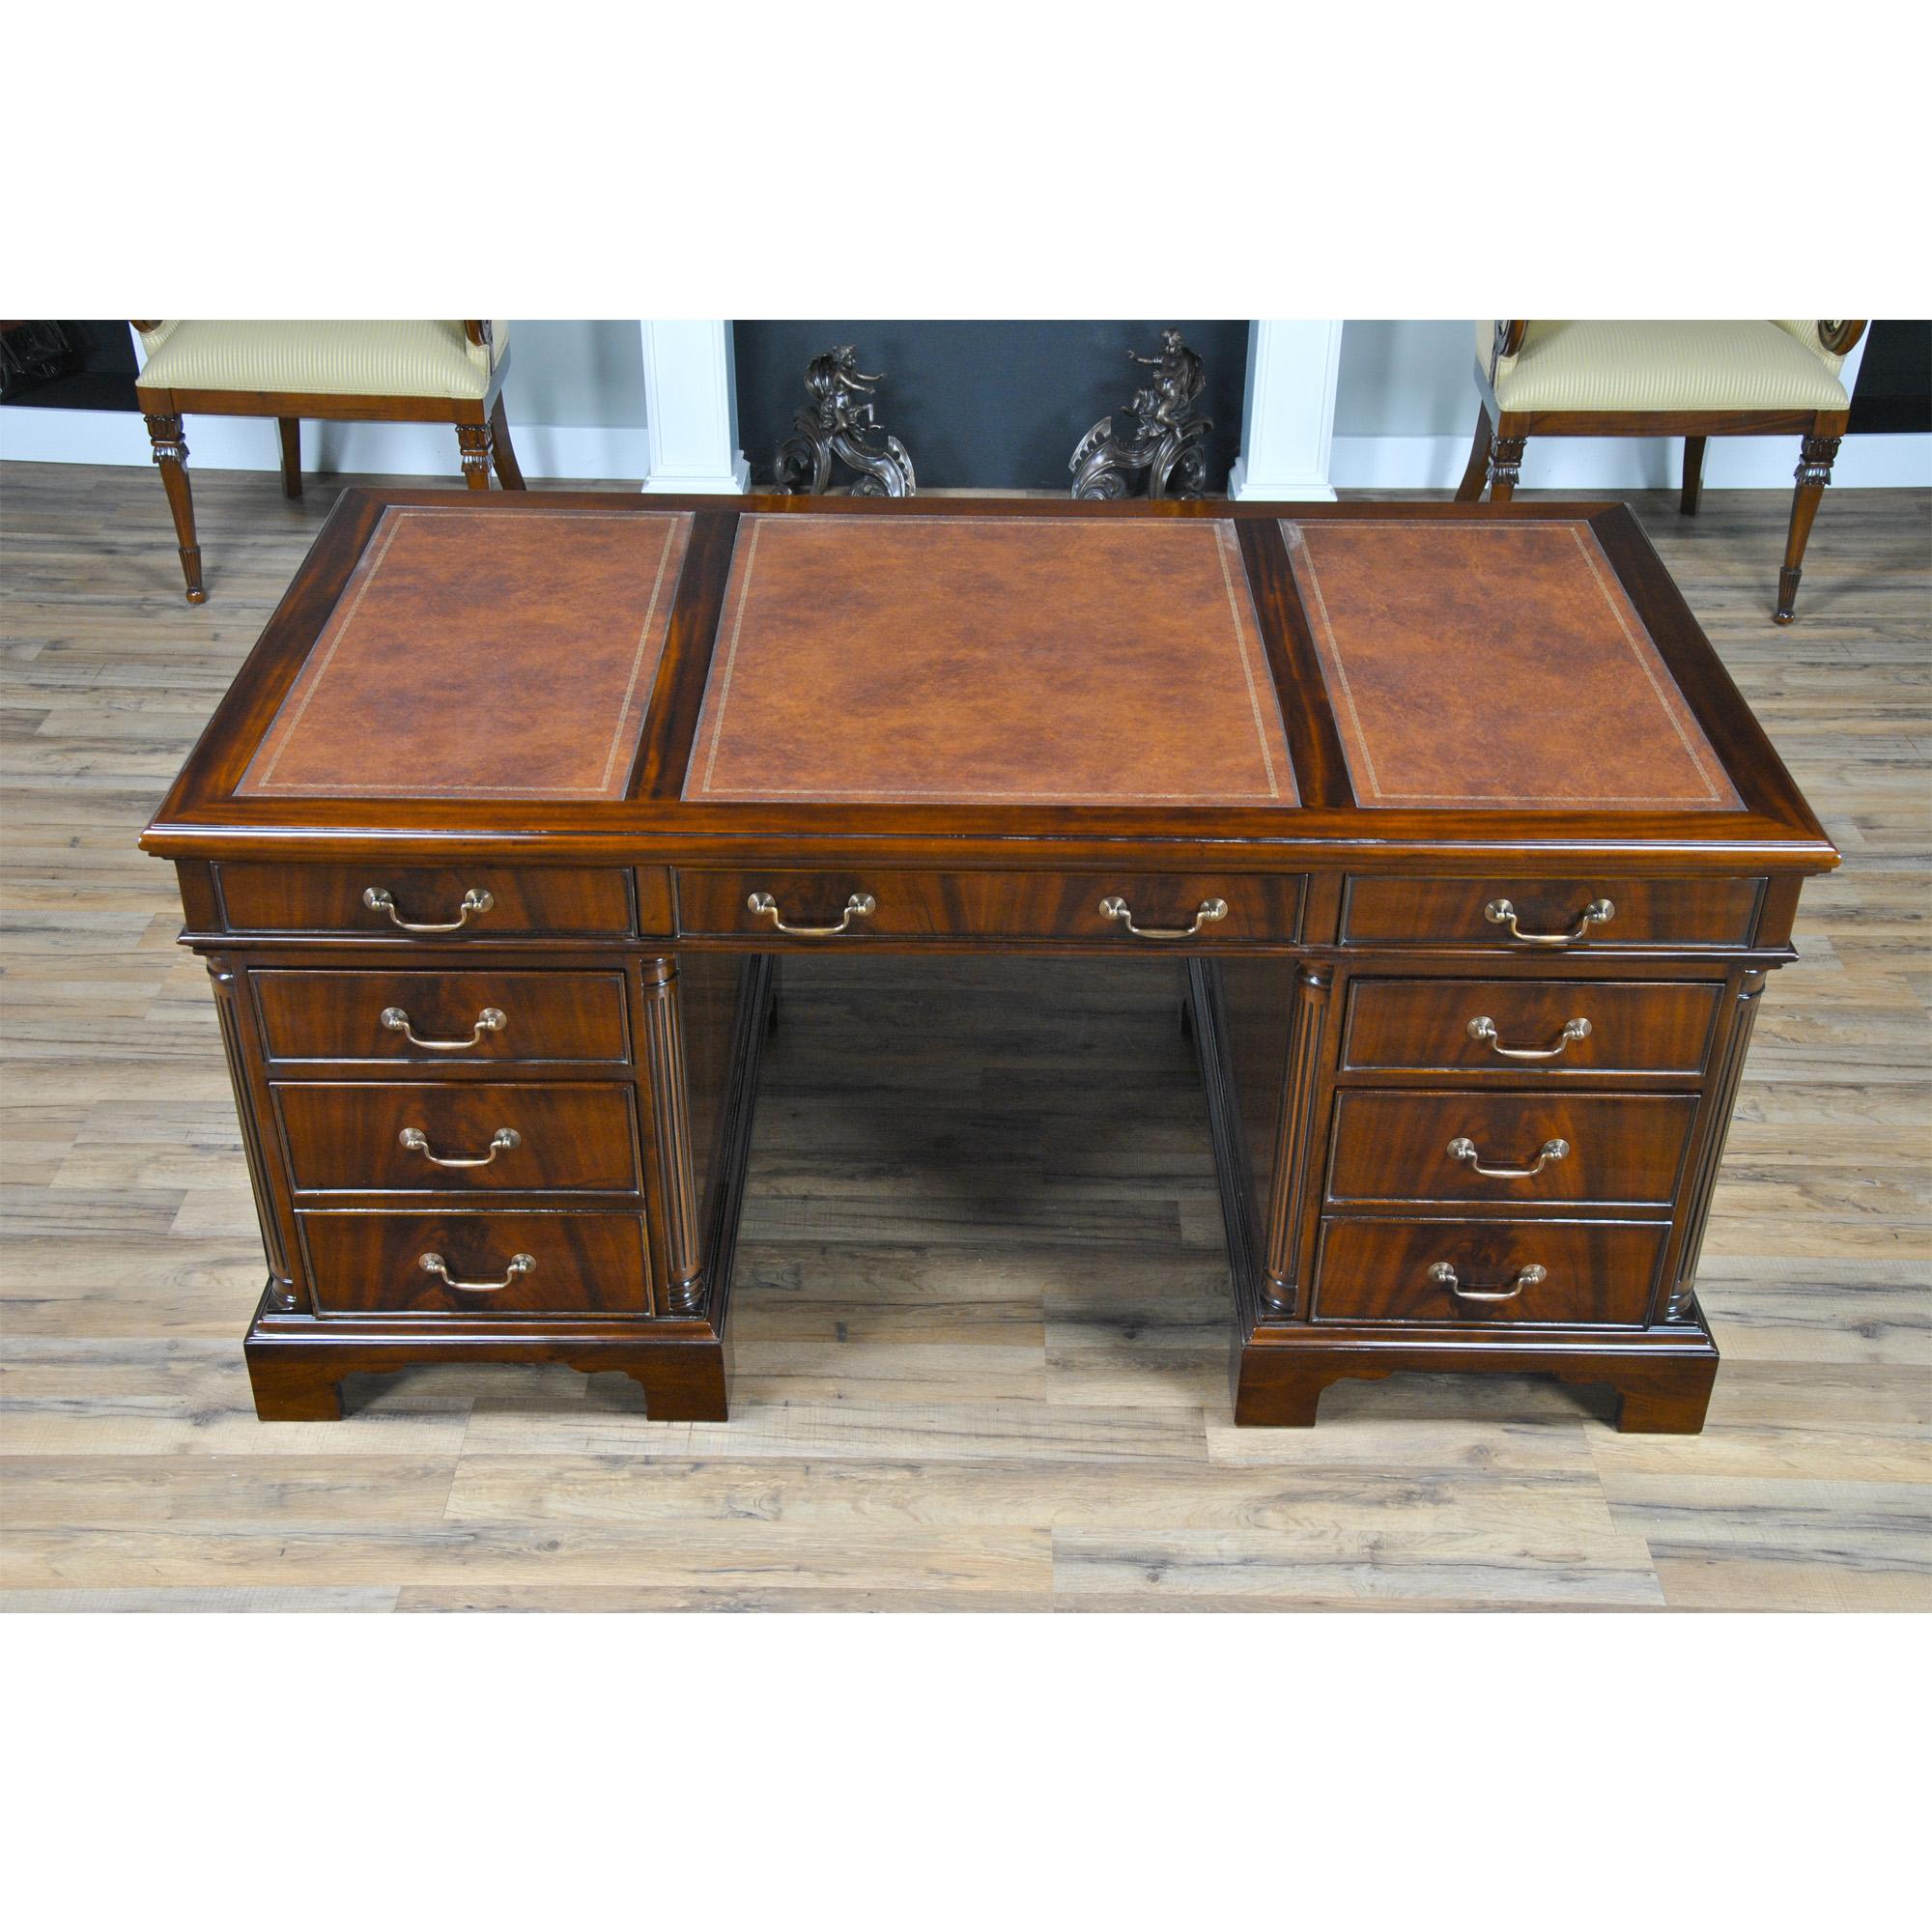 Ideal for use either at work or in a home office the Niagara Furniture Mahogany Executive Desk with a tooled leather top is both beautiful and functional. Built in three sections for easy handling and installation the top section boasts three deep